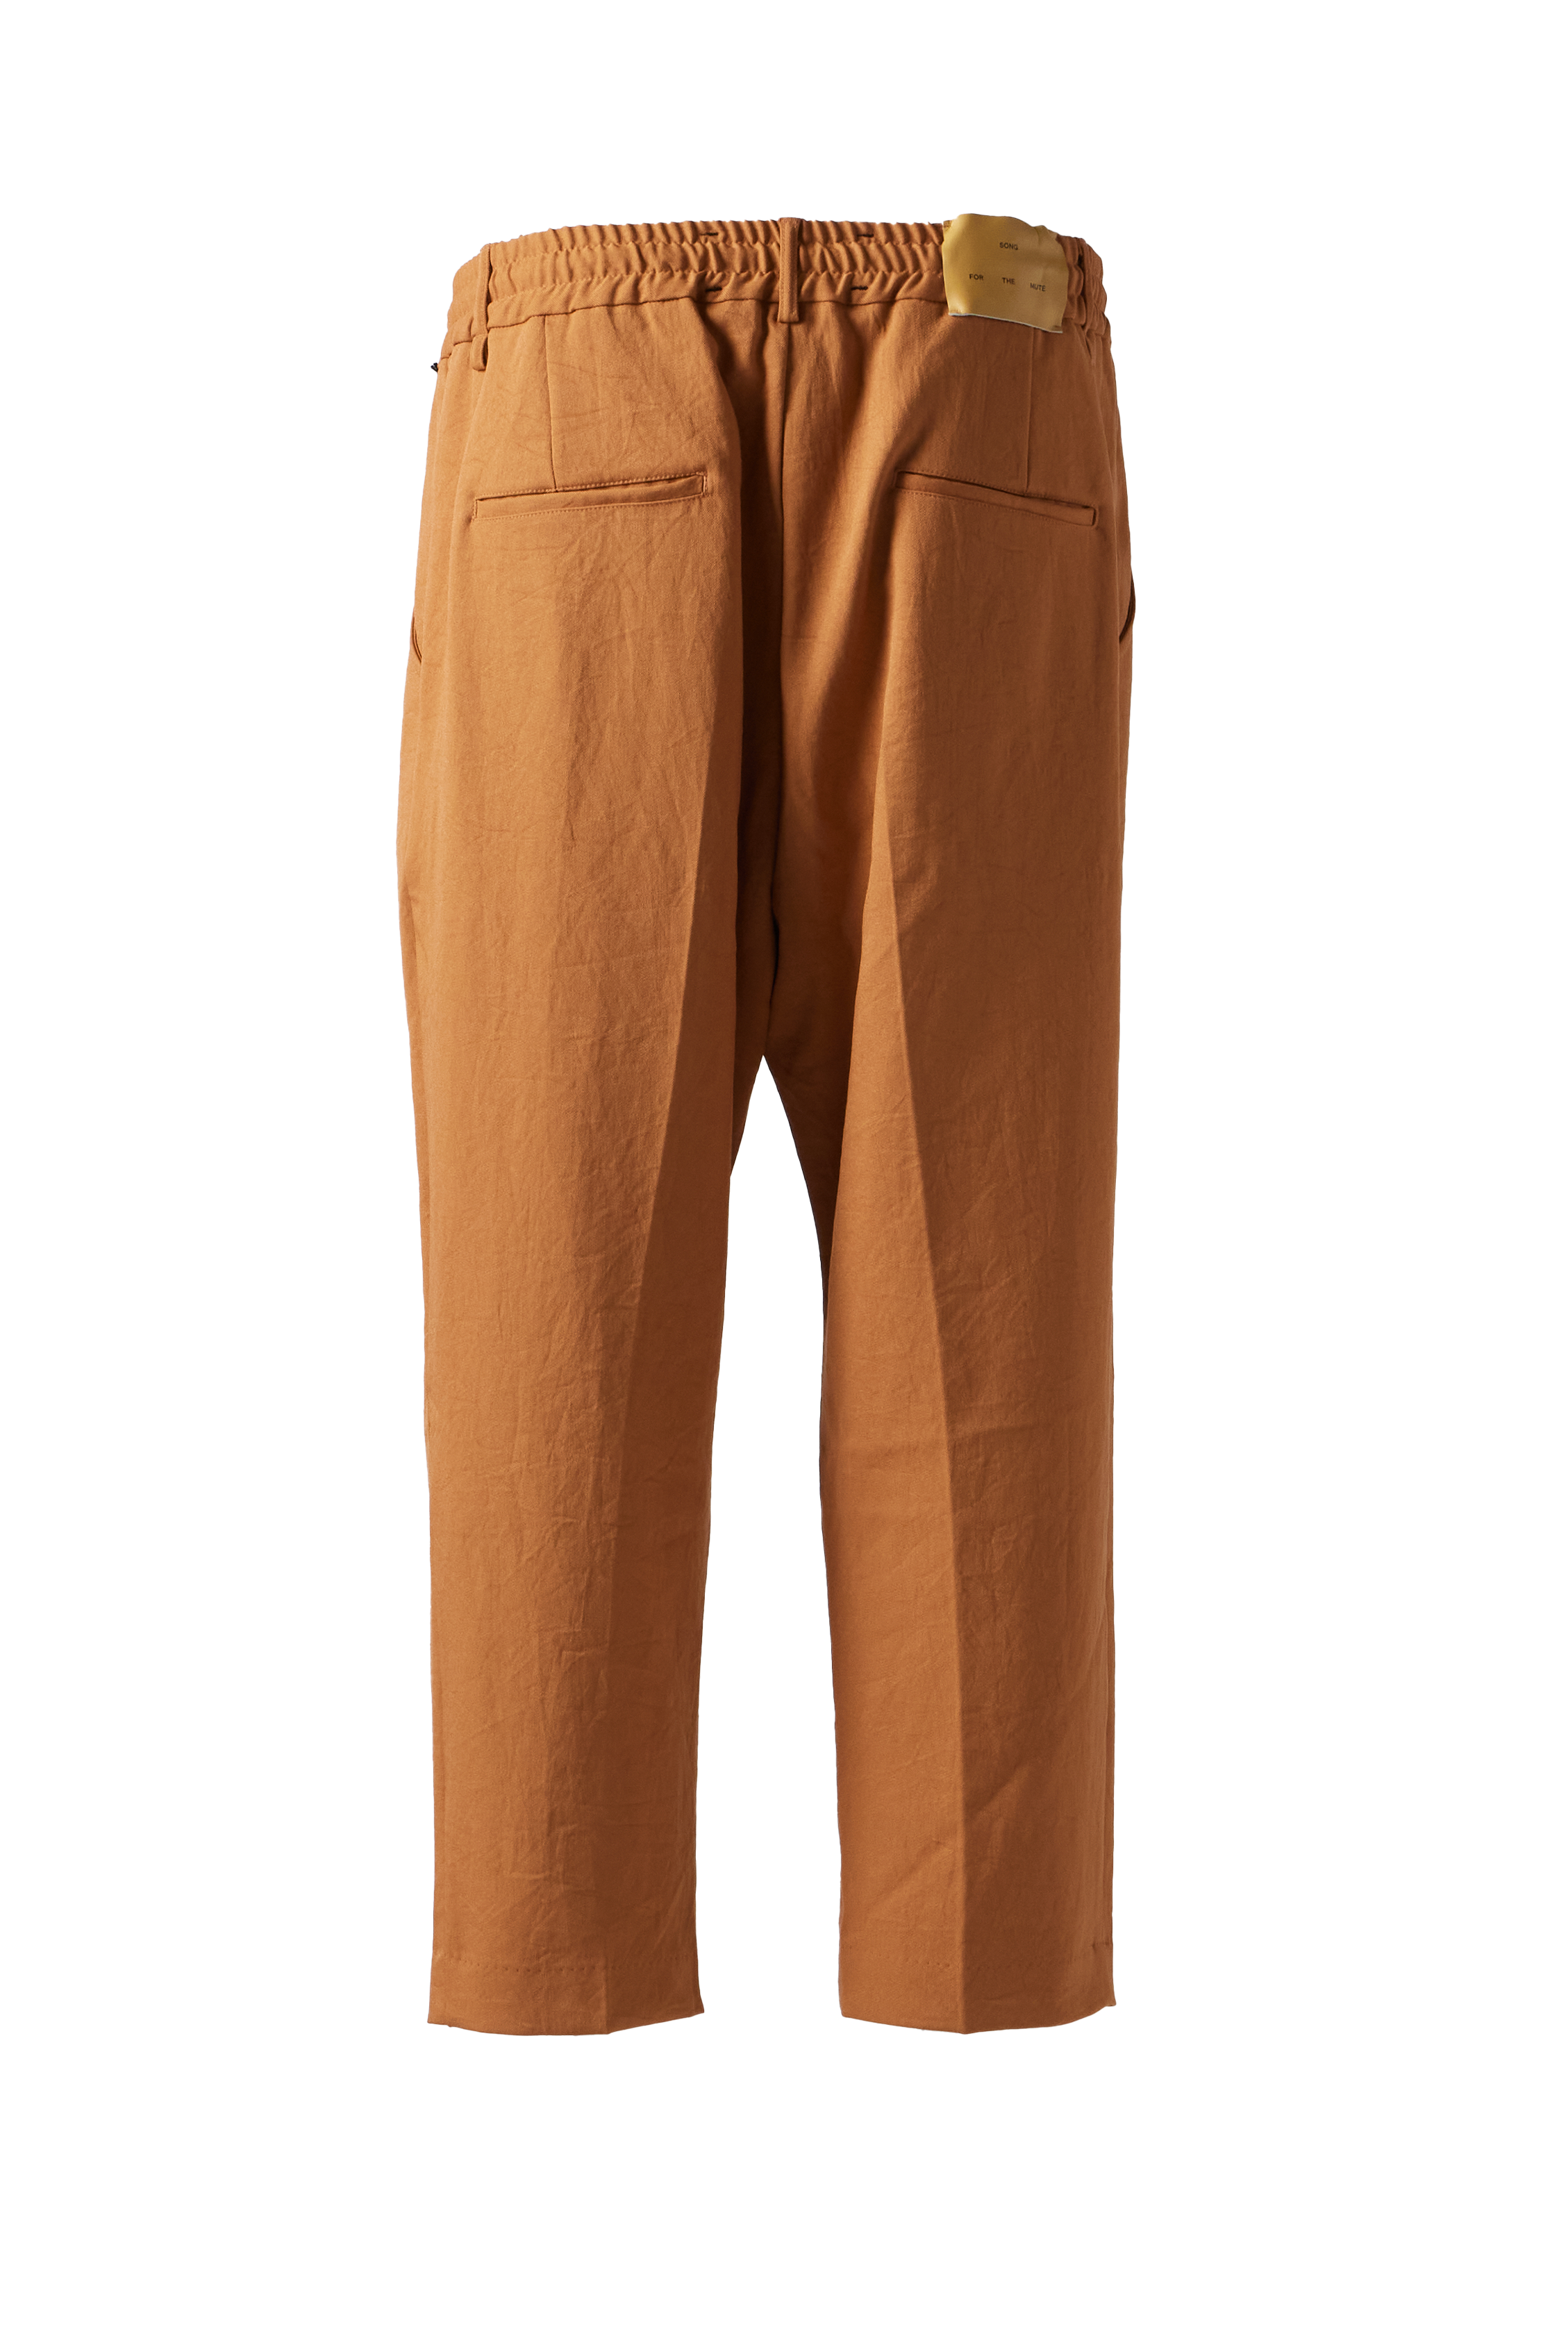 SONG FOR THE MUTE - Camel Lounge Pant product image